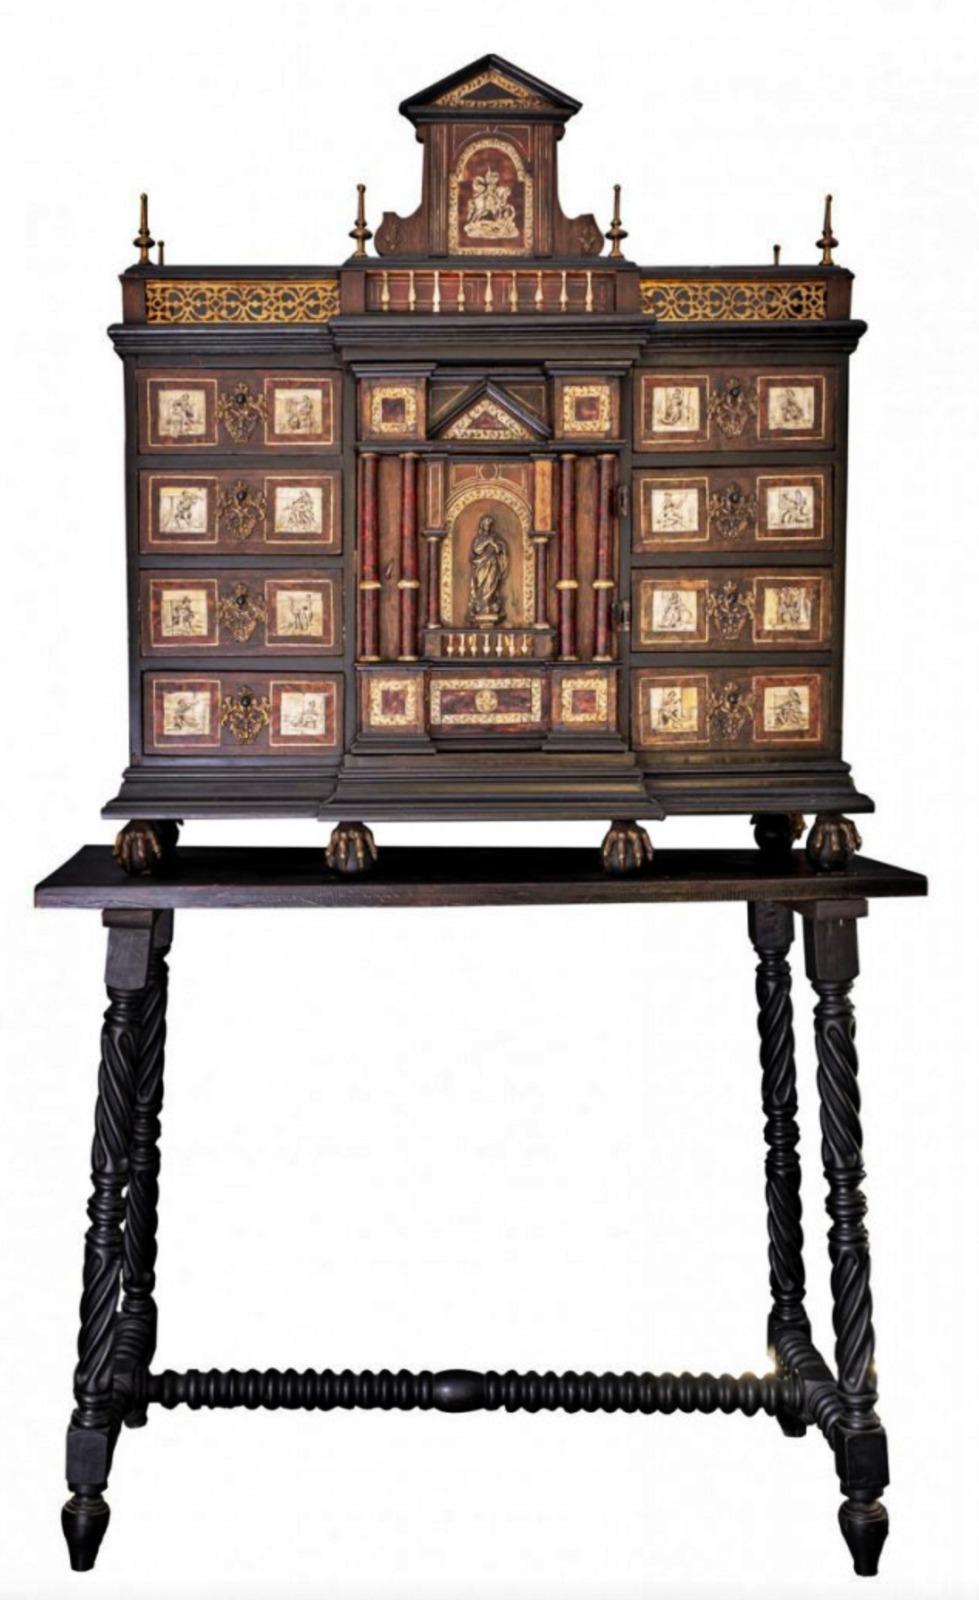 Spanish-Flemish Bargueño 17th century.
In ebonized wood with tortoiseshell and bone marquetry.
Bargueño of three streets. Central street with a chapel flanked by columns with an image of the Immaculate Conception in bronze. Side rails with four